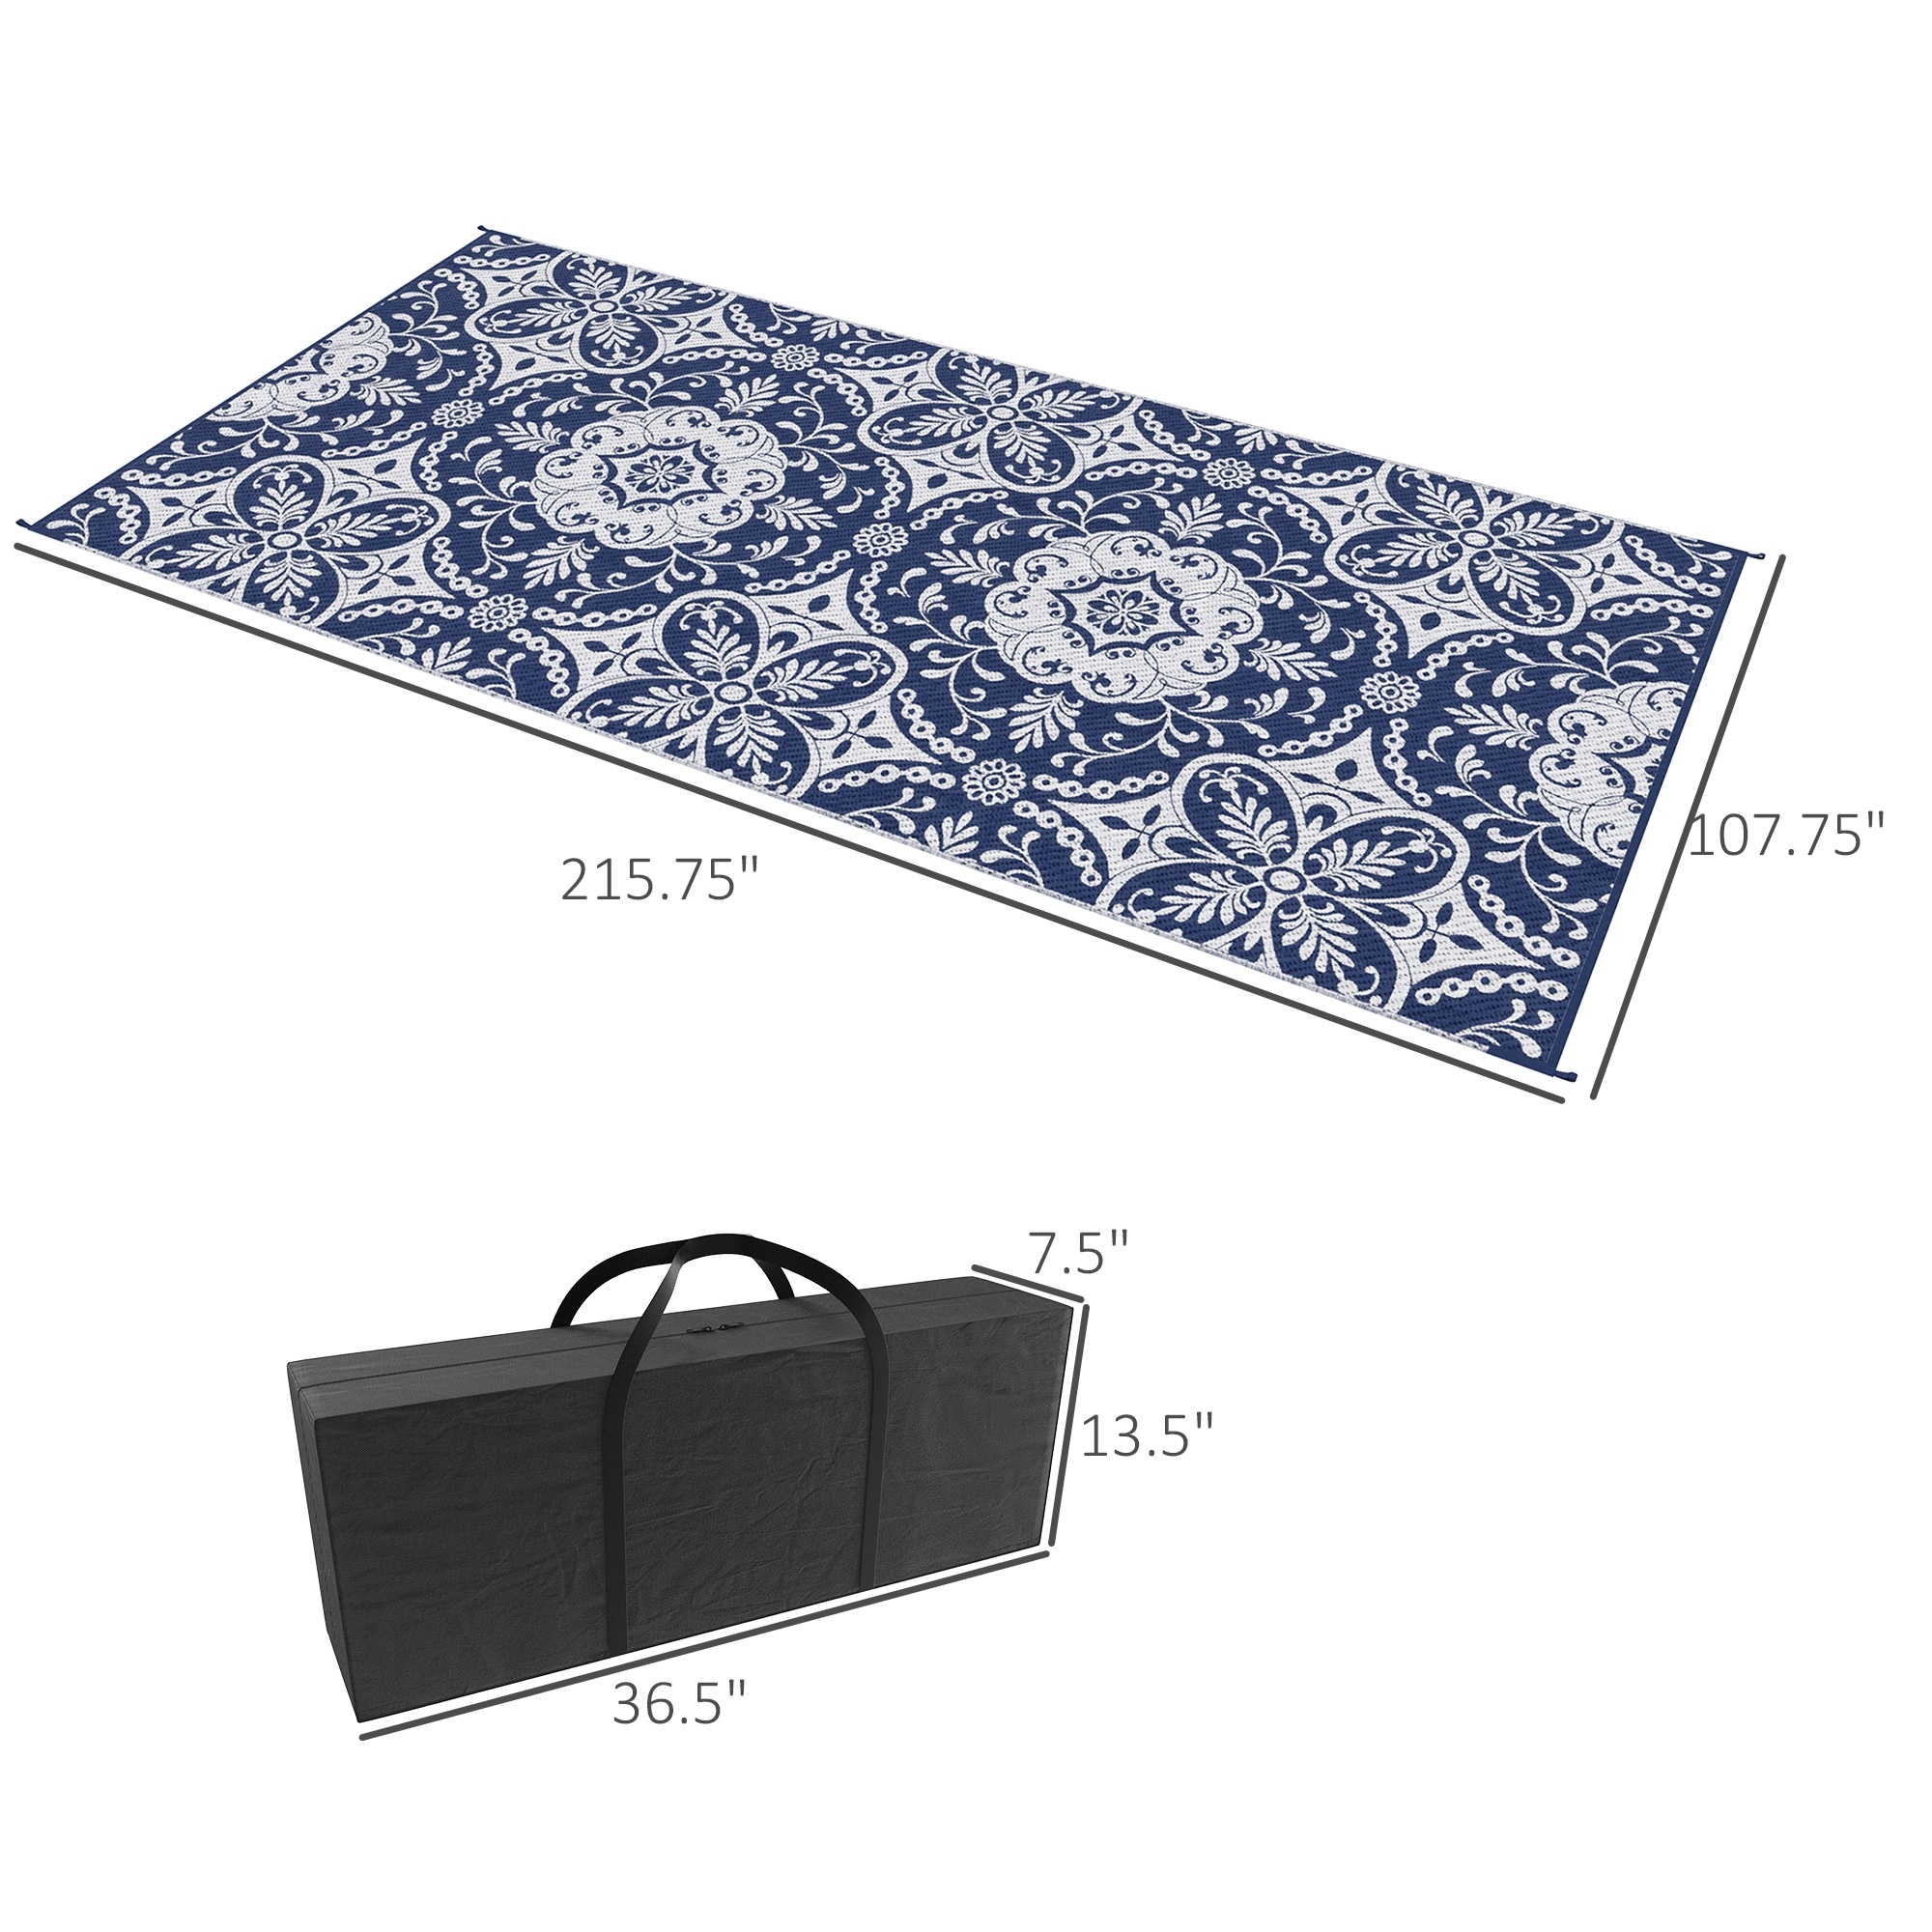 Outsunny 9' x 12' RV Mat, Outdoor Patio Rug / Large Camping Carpet with Carrying Bag, Waterproof Plastic Straw, Design for Backyard